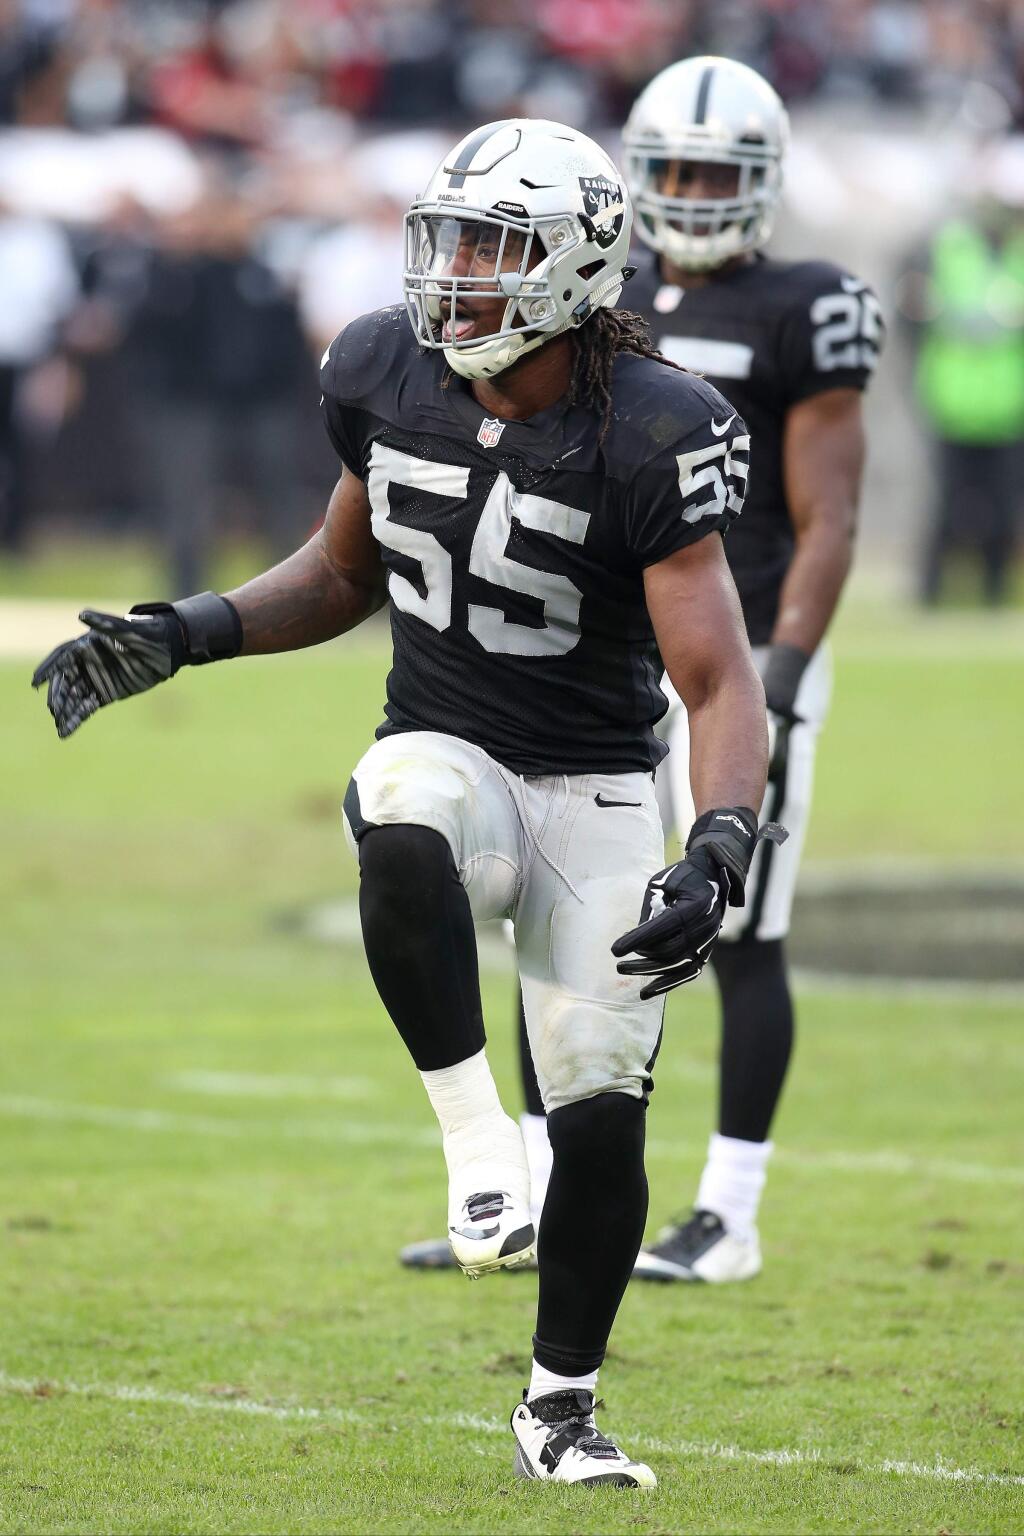 Oakland Raiders outside linebacker Sio Moore (55) plays against the San Francisco 49ers during a game at O.com Coliseum in Oakland on Sunday, Dec. 7, 2014. (AP Photo/Michael Zito)